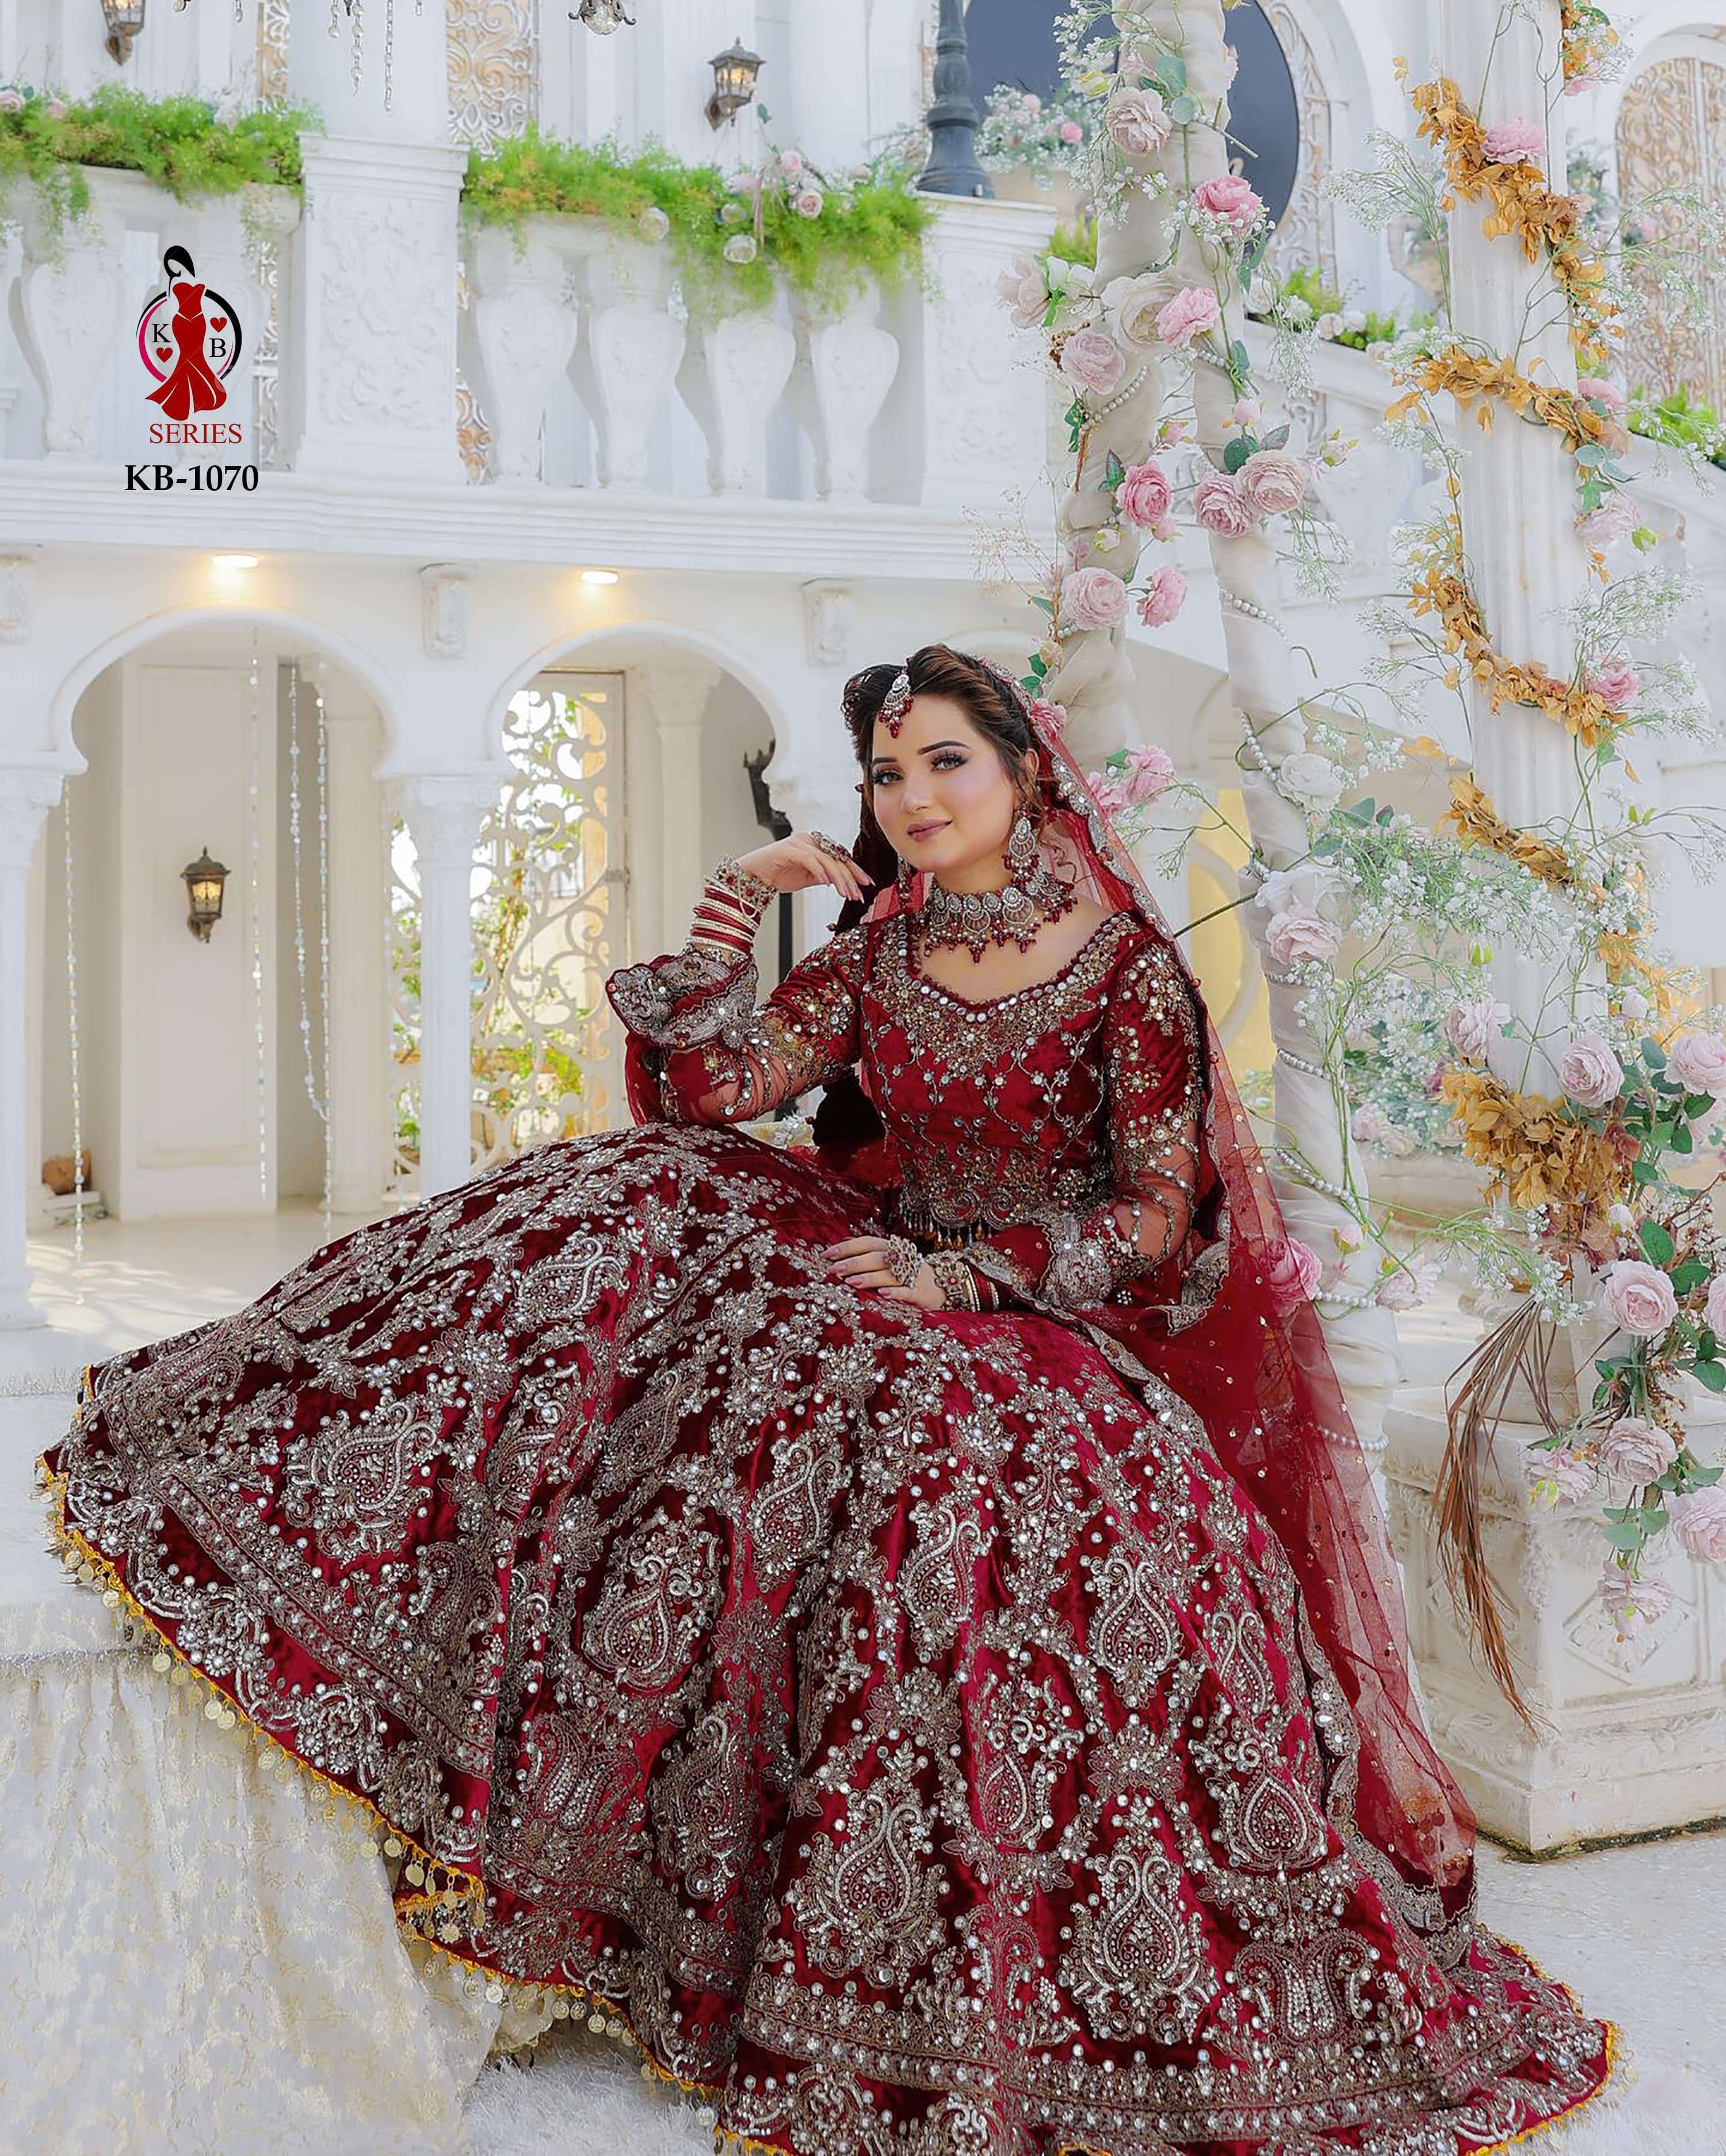 Latest Lehenga Blouse Designs For 2019 You Need To Try | Latest lehenga  blouse designs, Lehenga blouse designs, Long blouse designs